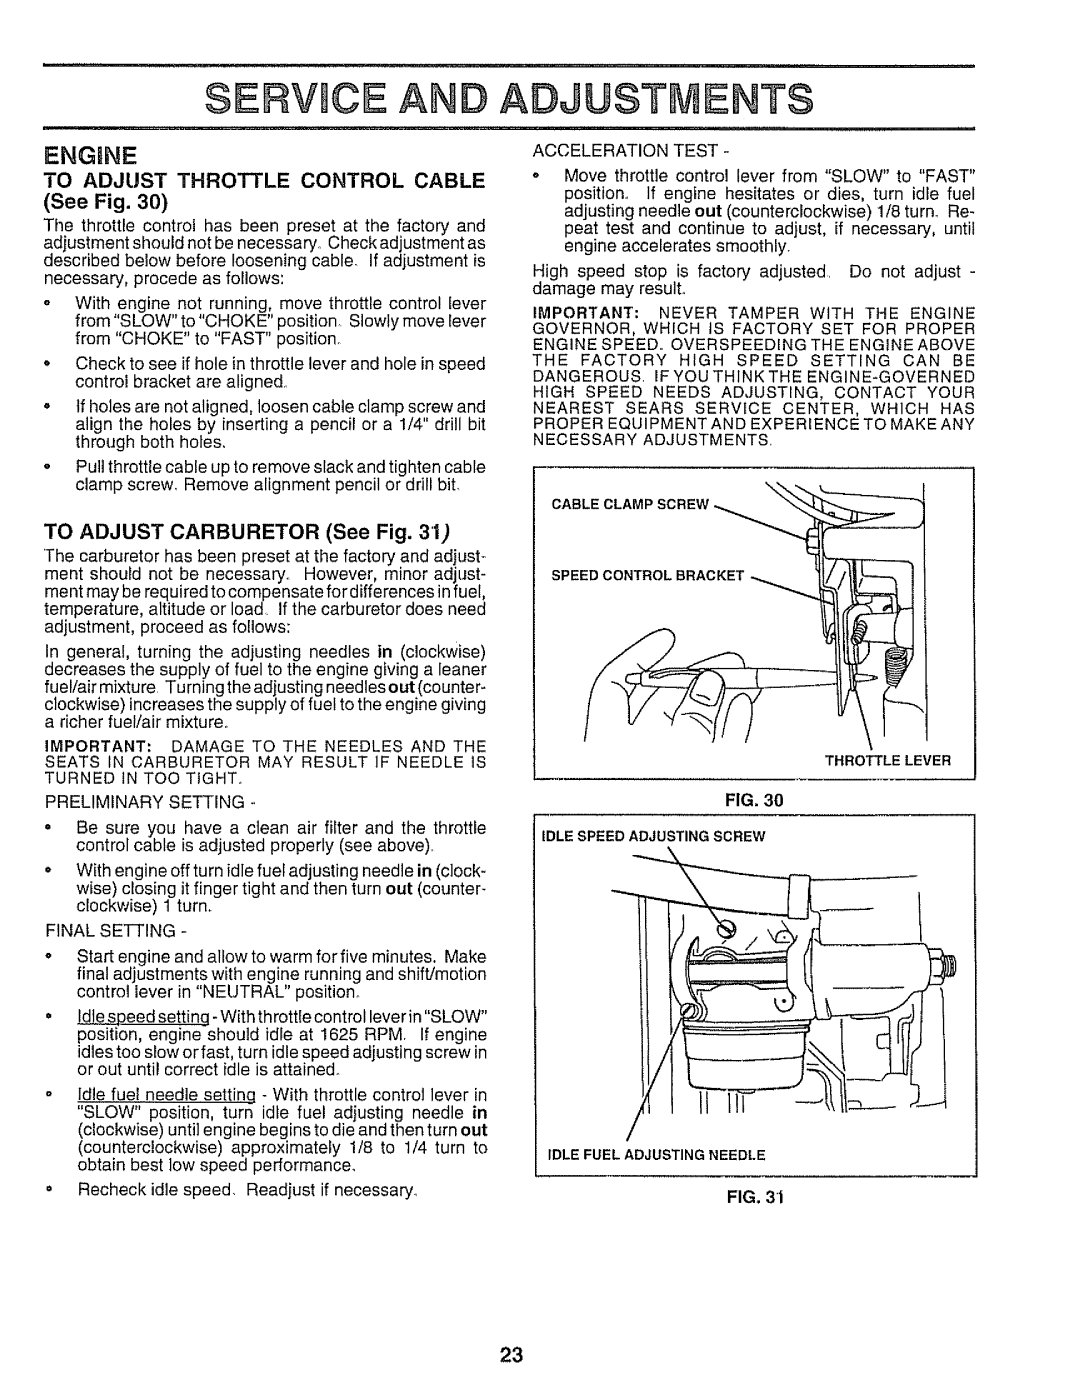 Sears 917.25545 owner manual SERVnCE AND, Adjustments, Engine, TO ADJUST THROTTLE CONTROL CABLE See Fig 